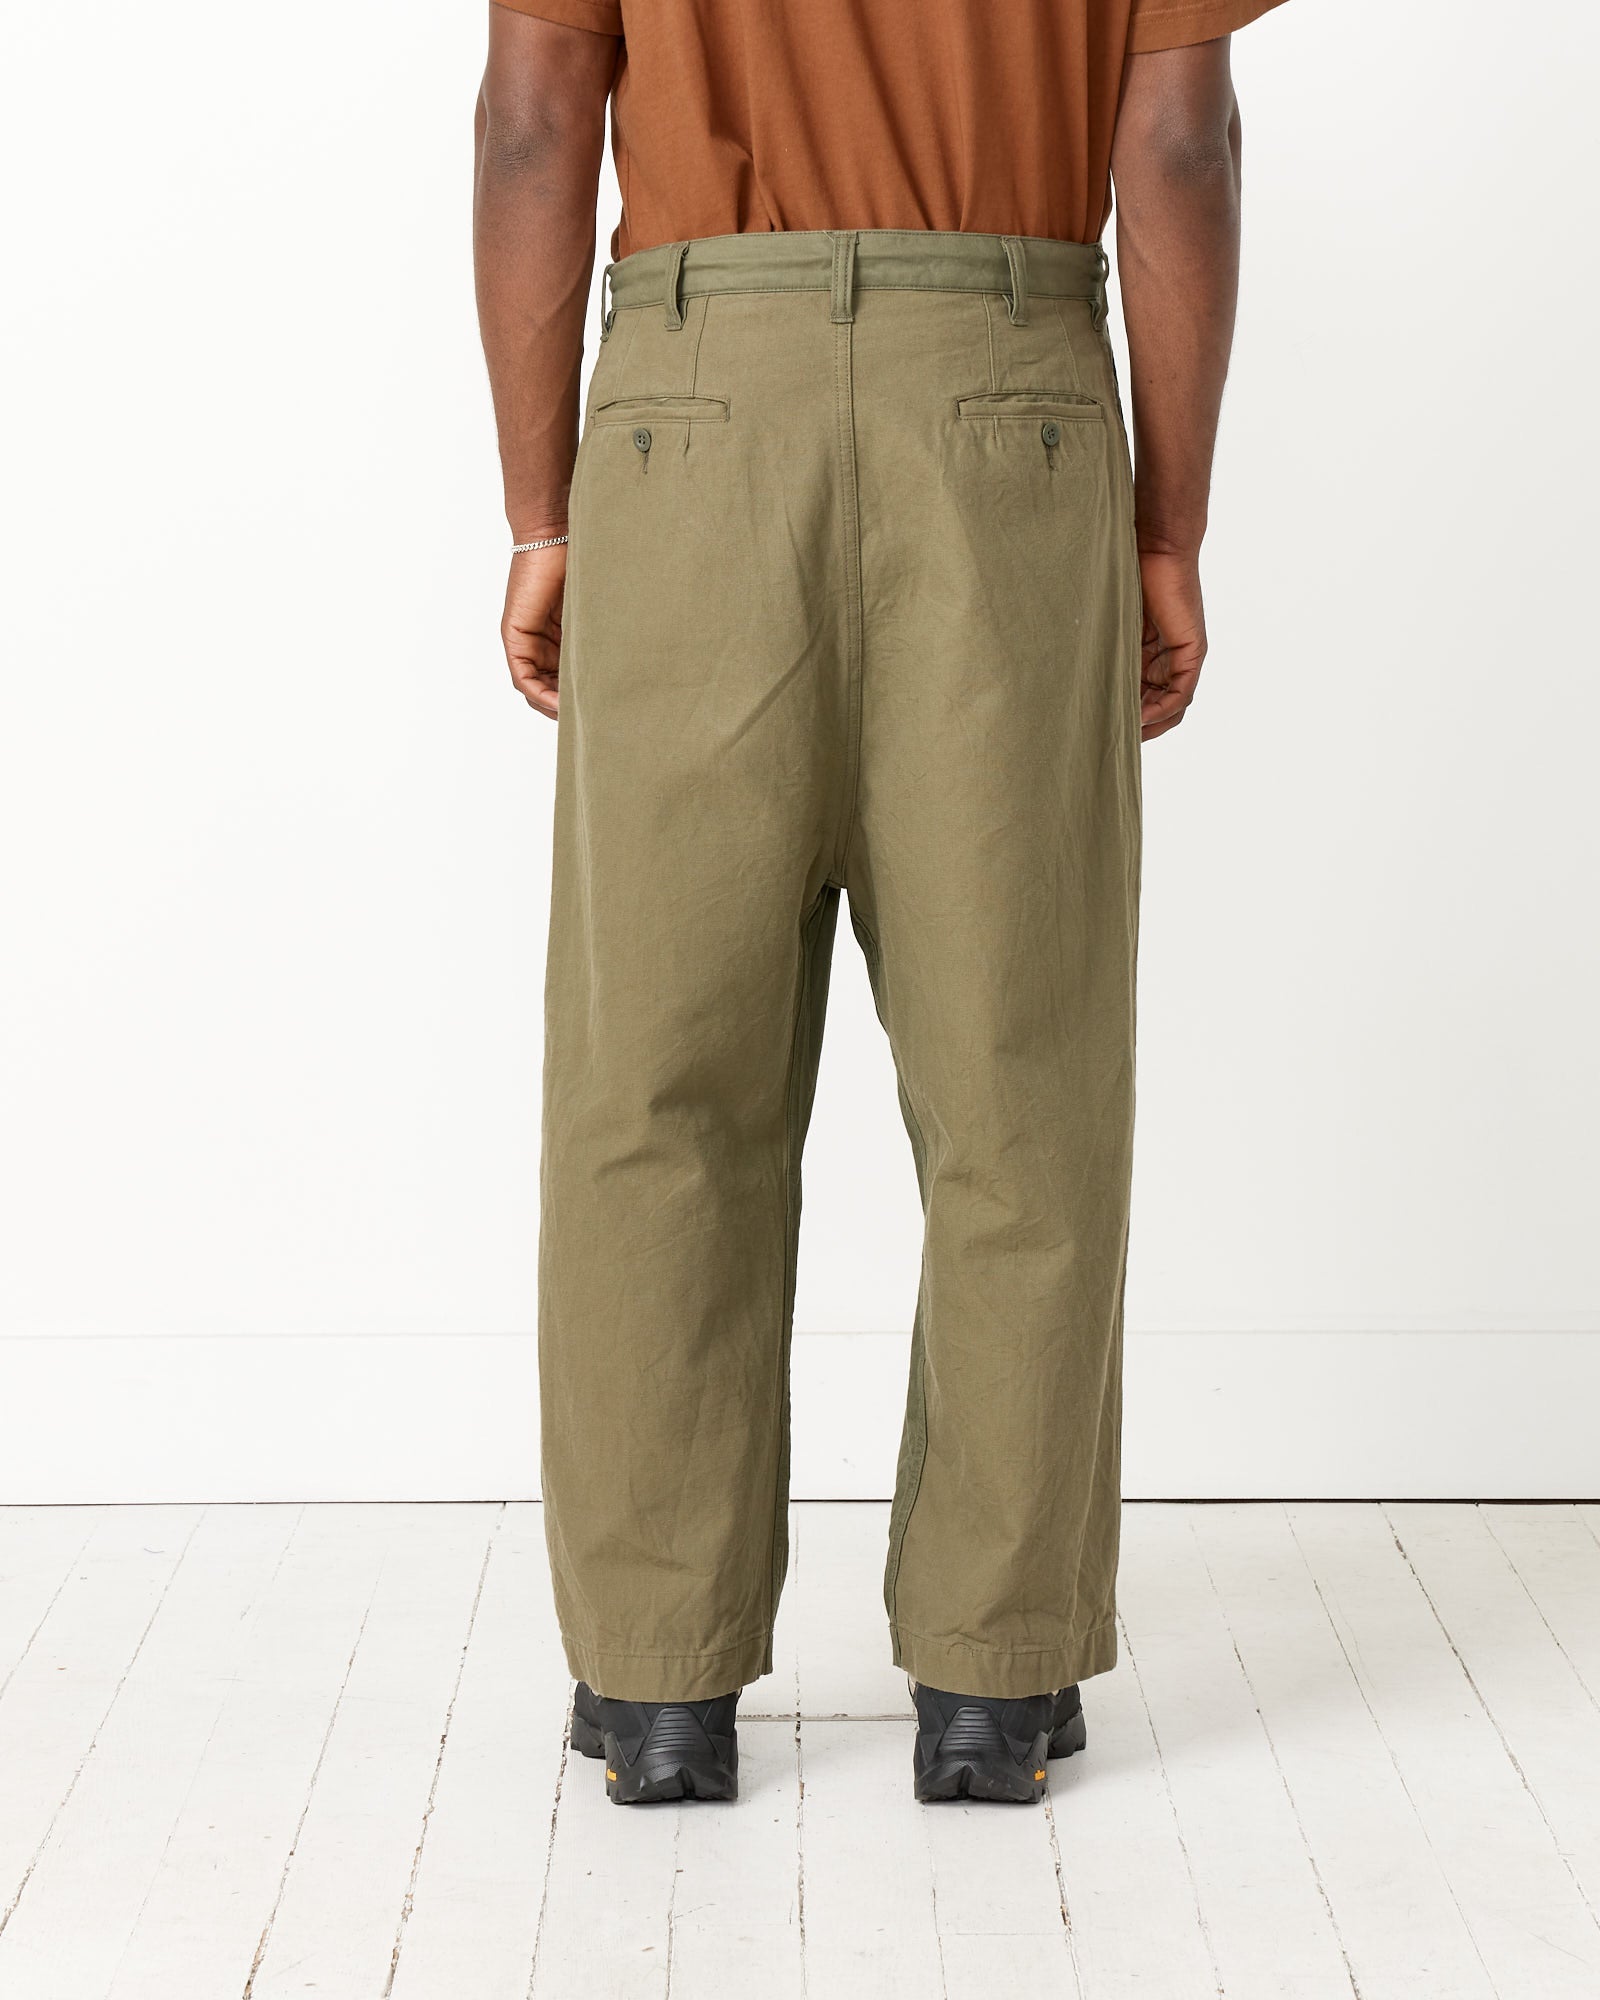 Mohawk General Store | Sillage | Essential Hakama Pants in Anthracite